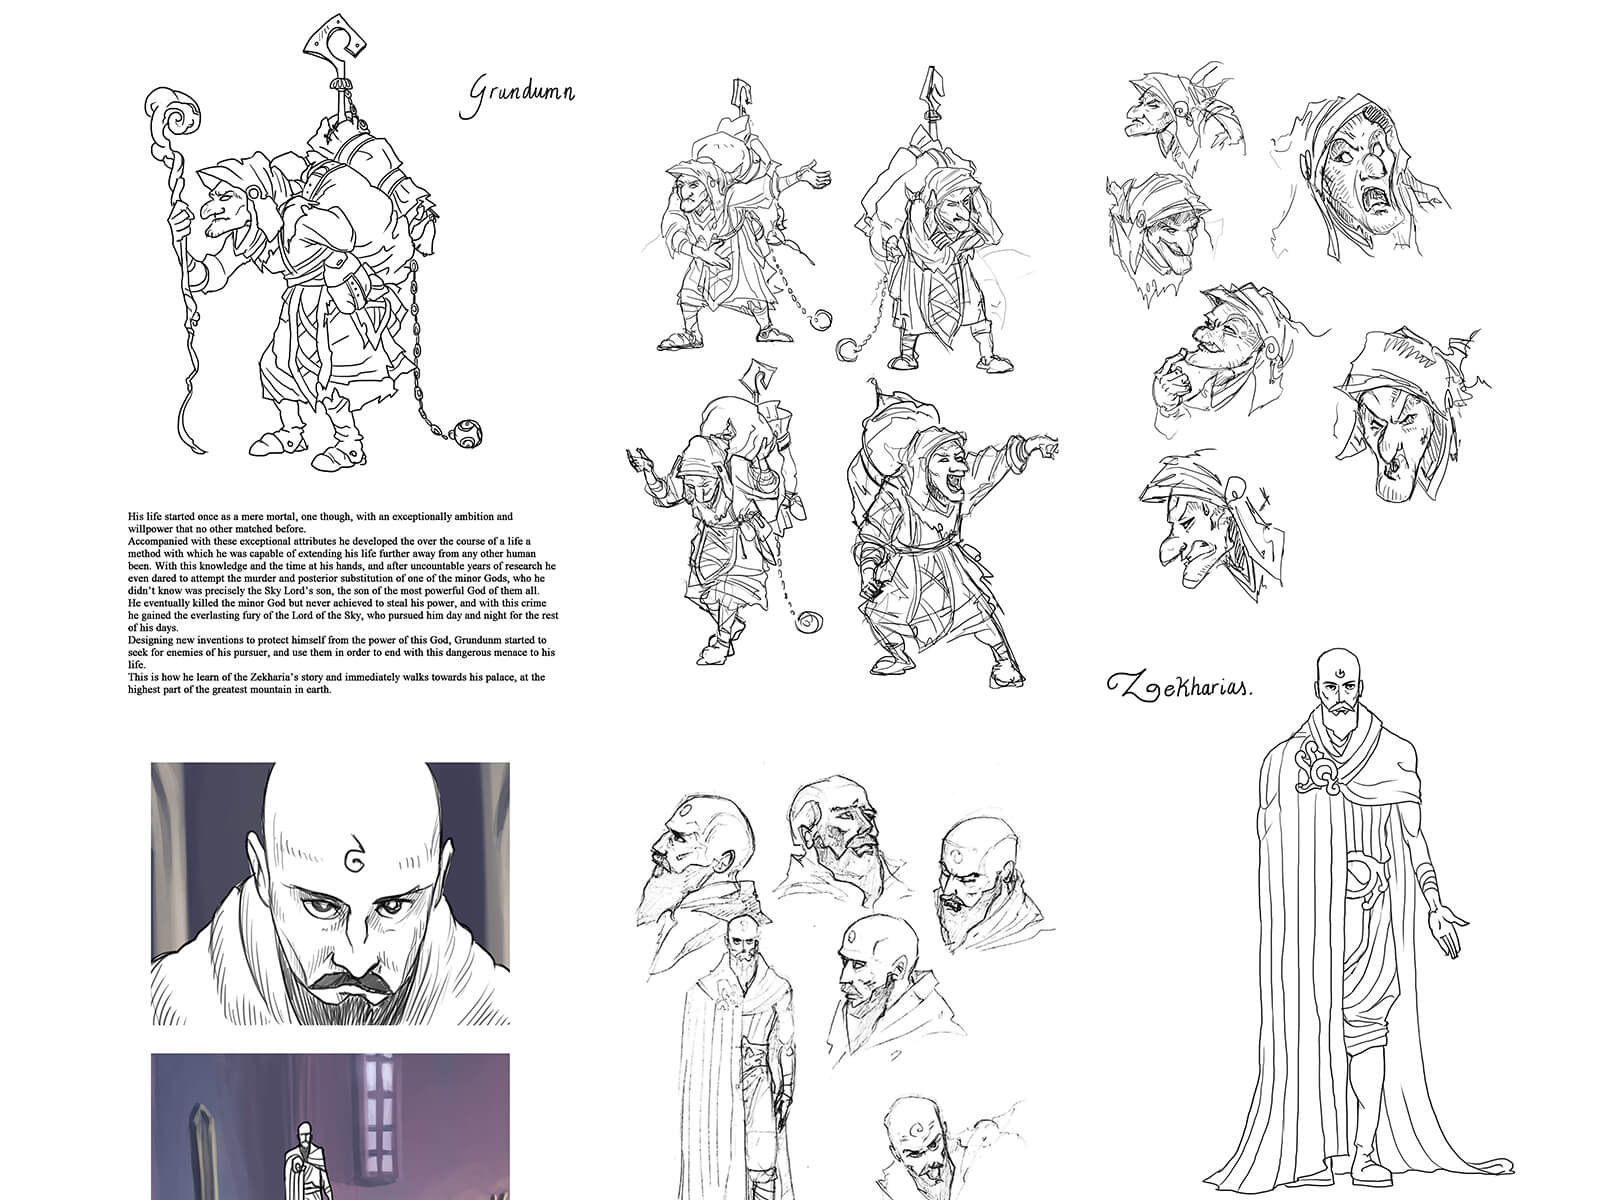 Black-and-white sketches of a hunched over goblin with a large rucksack and a tall, bald robed man with a beard.